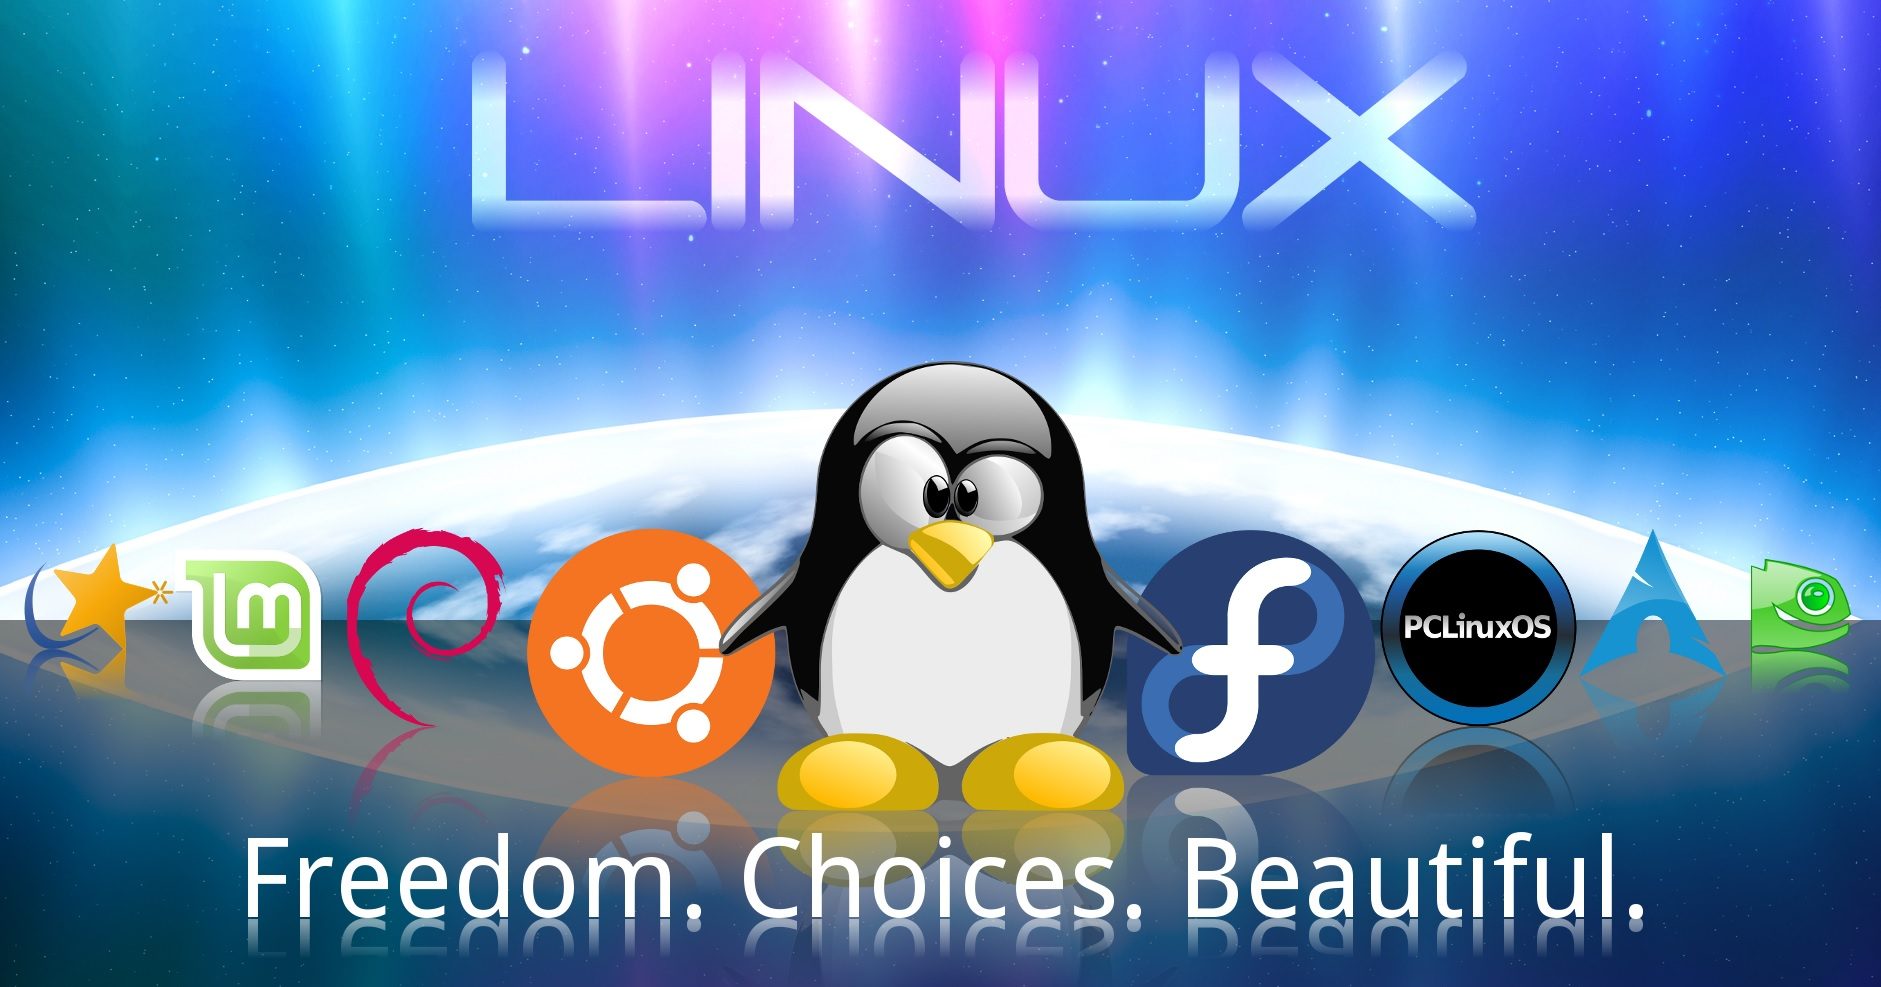 all linux versions are open source true or false